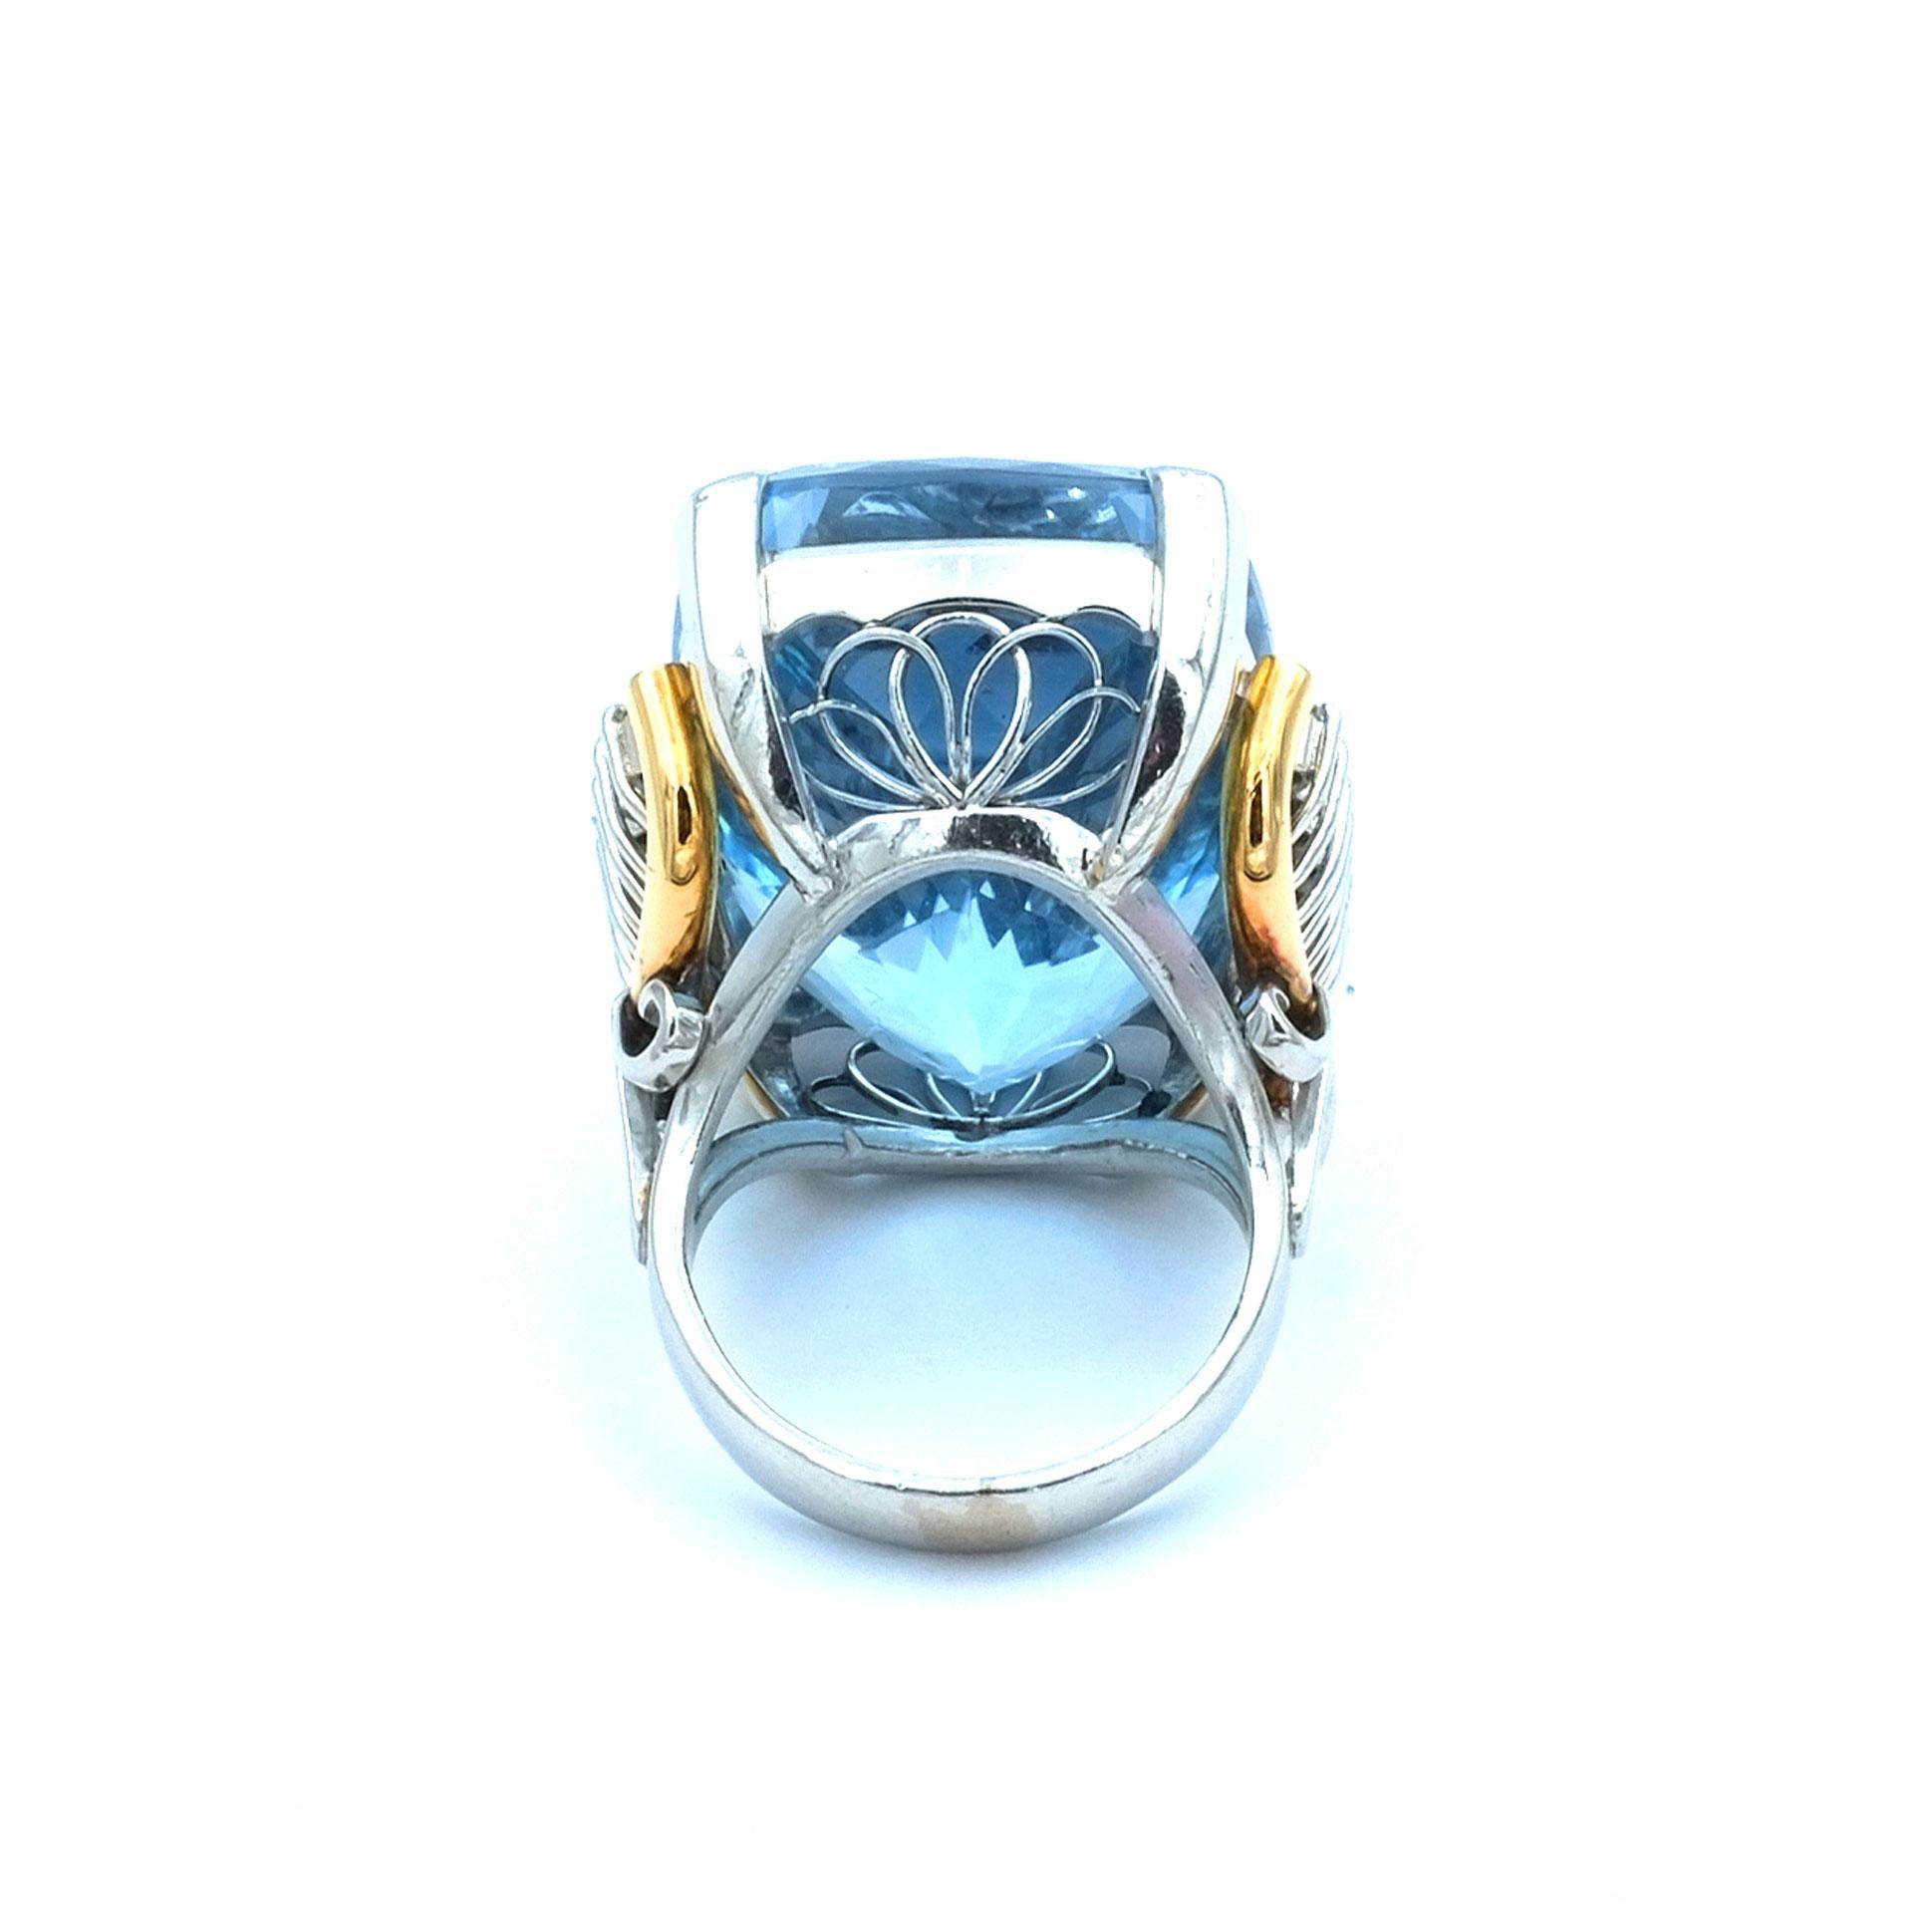 Women's Certified 58 ct Blue Topaz Diamond Platinum and Gold Cocktail Ring circa 1940 For Sale